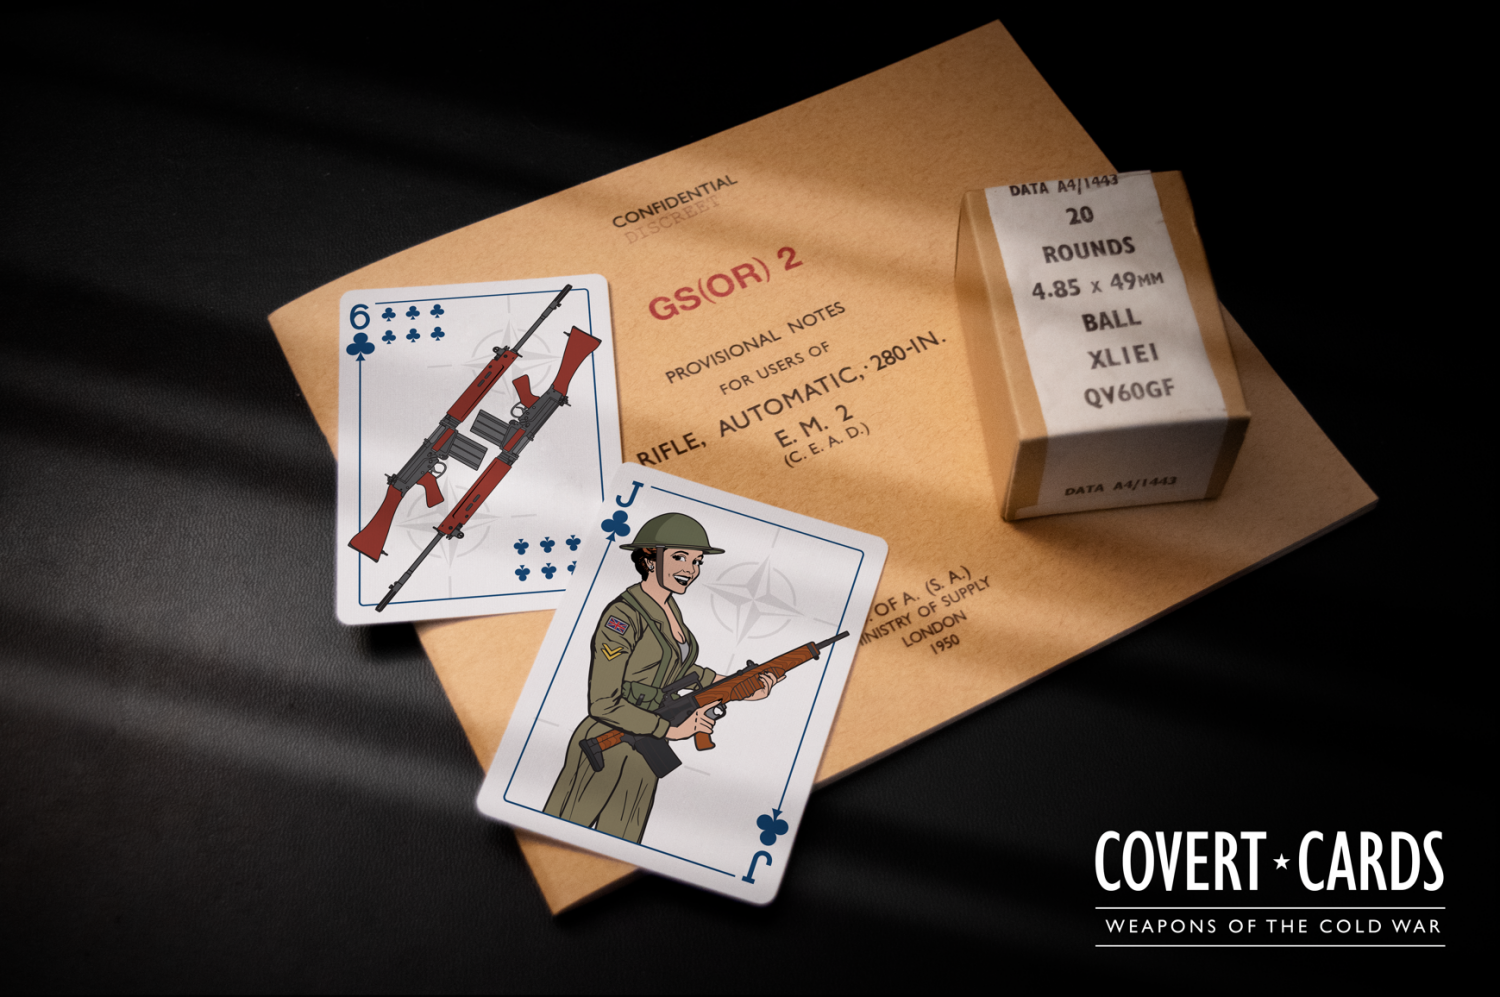 Helios House Press Launches Kickstarter for Covert Cards: Weapons of the Cold War